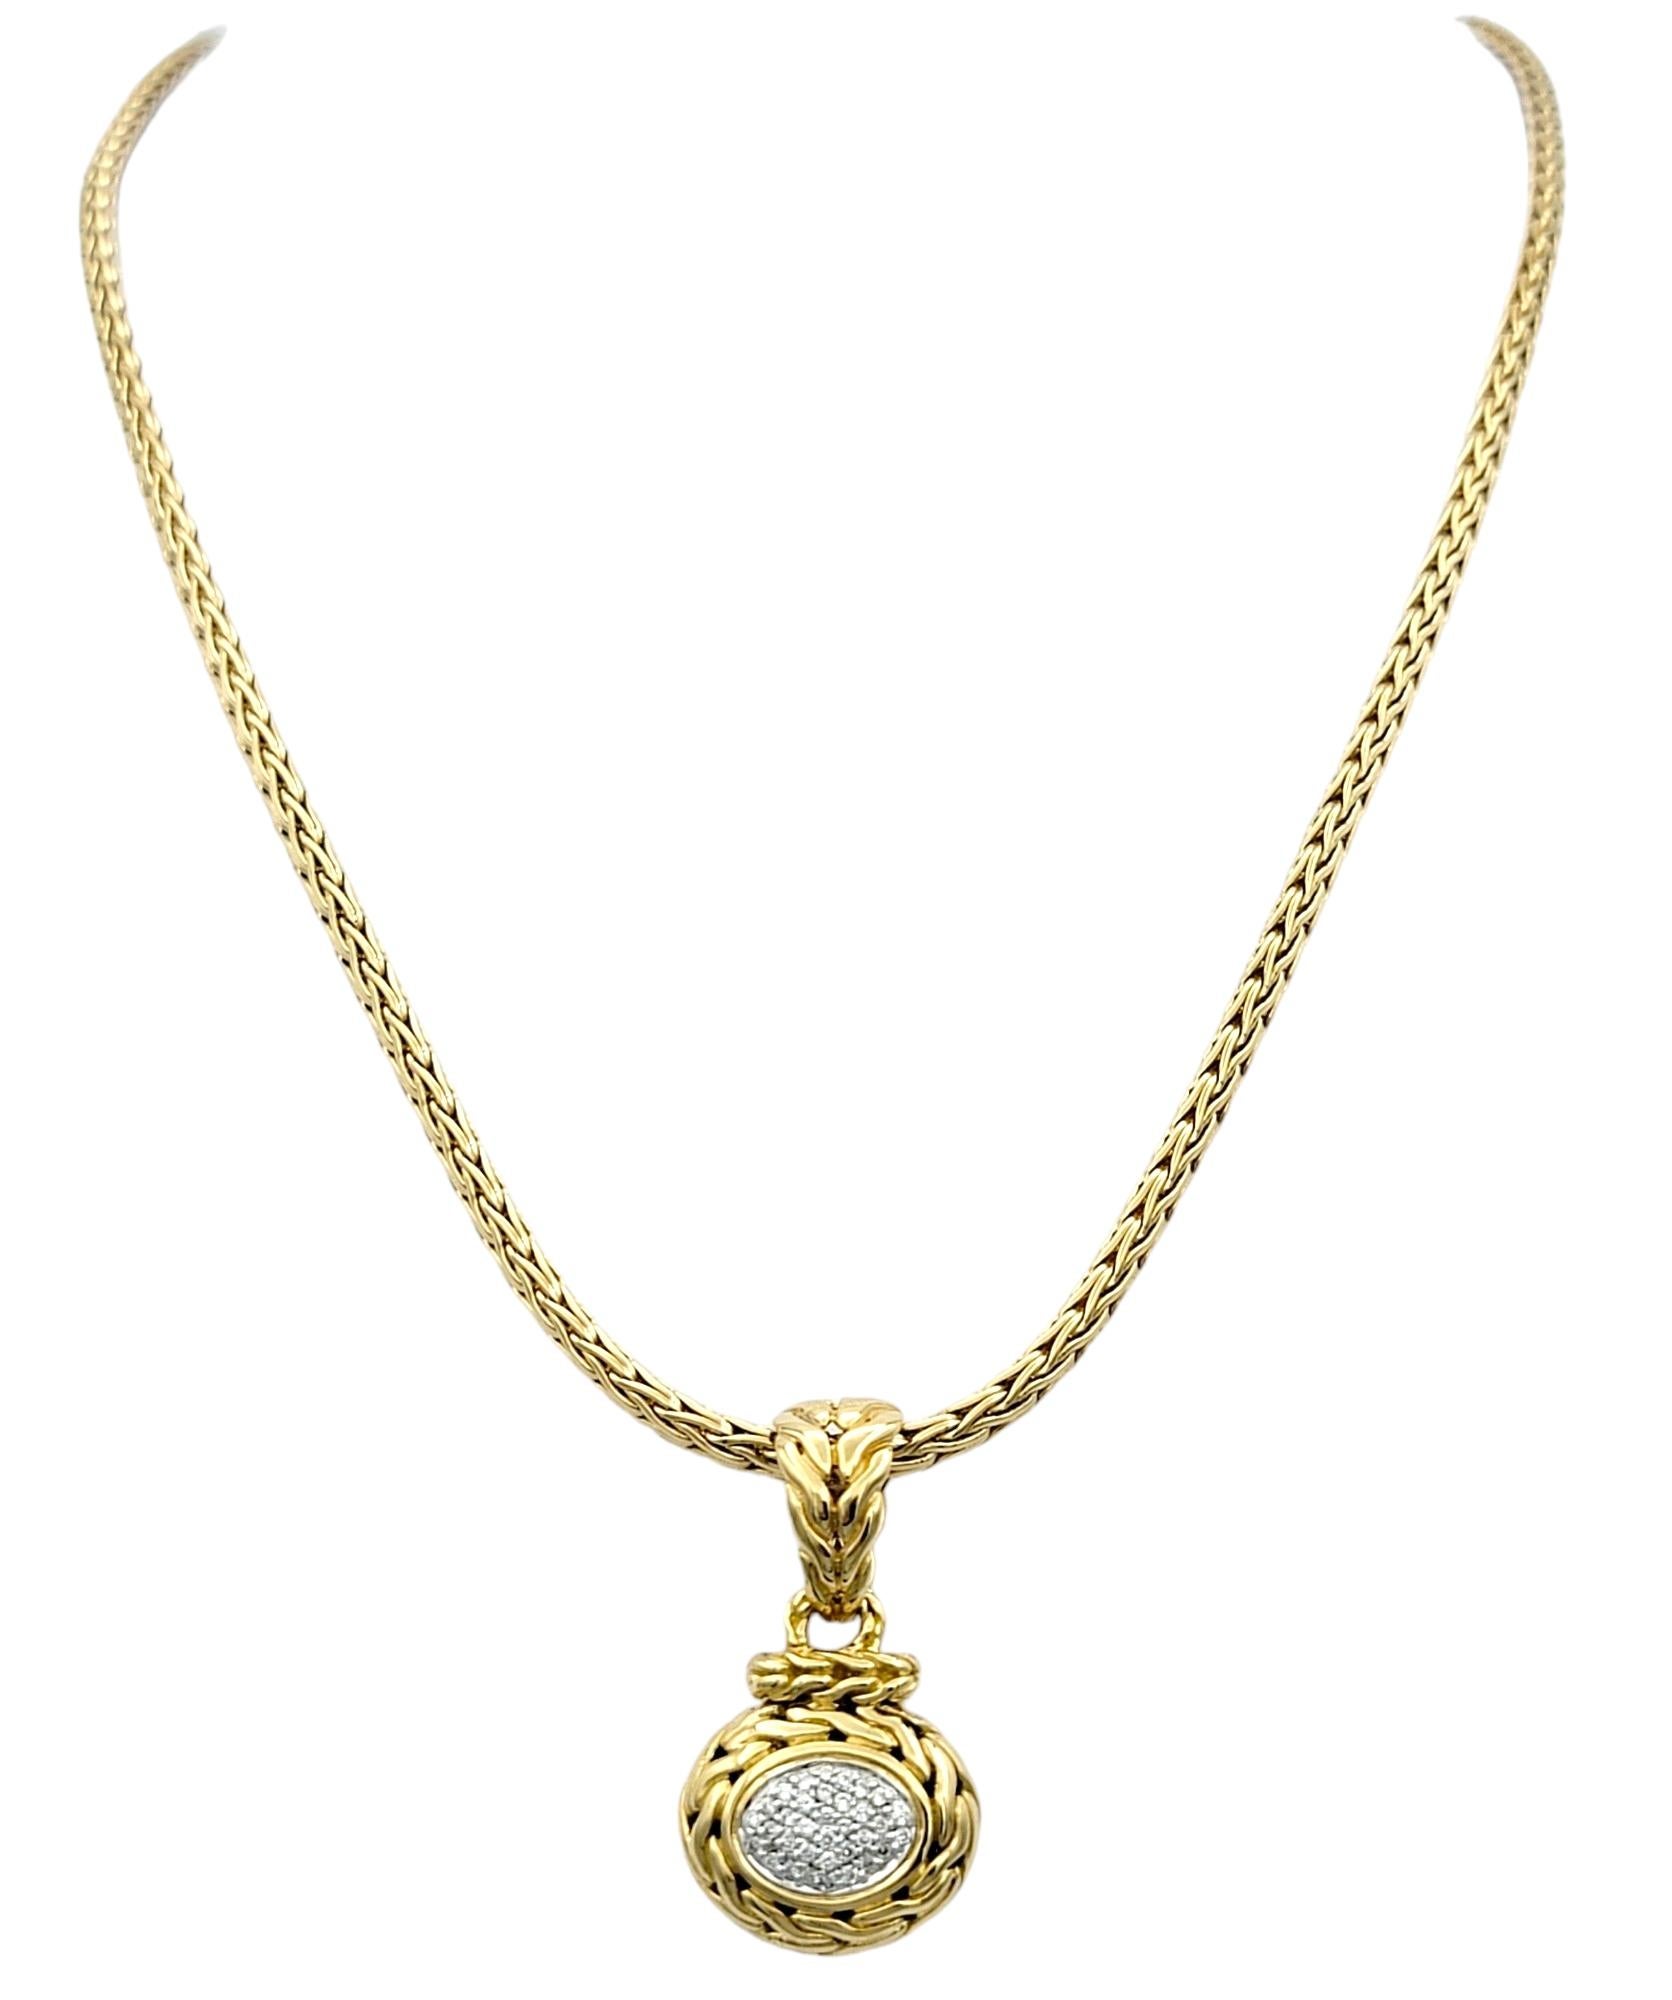 Round Cut John Hardy Pave Diamond Oval Pendant Necklace with Chain in 18 Karat Yellow Gold For Sale